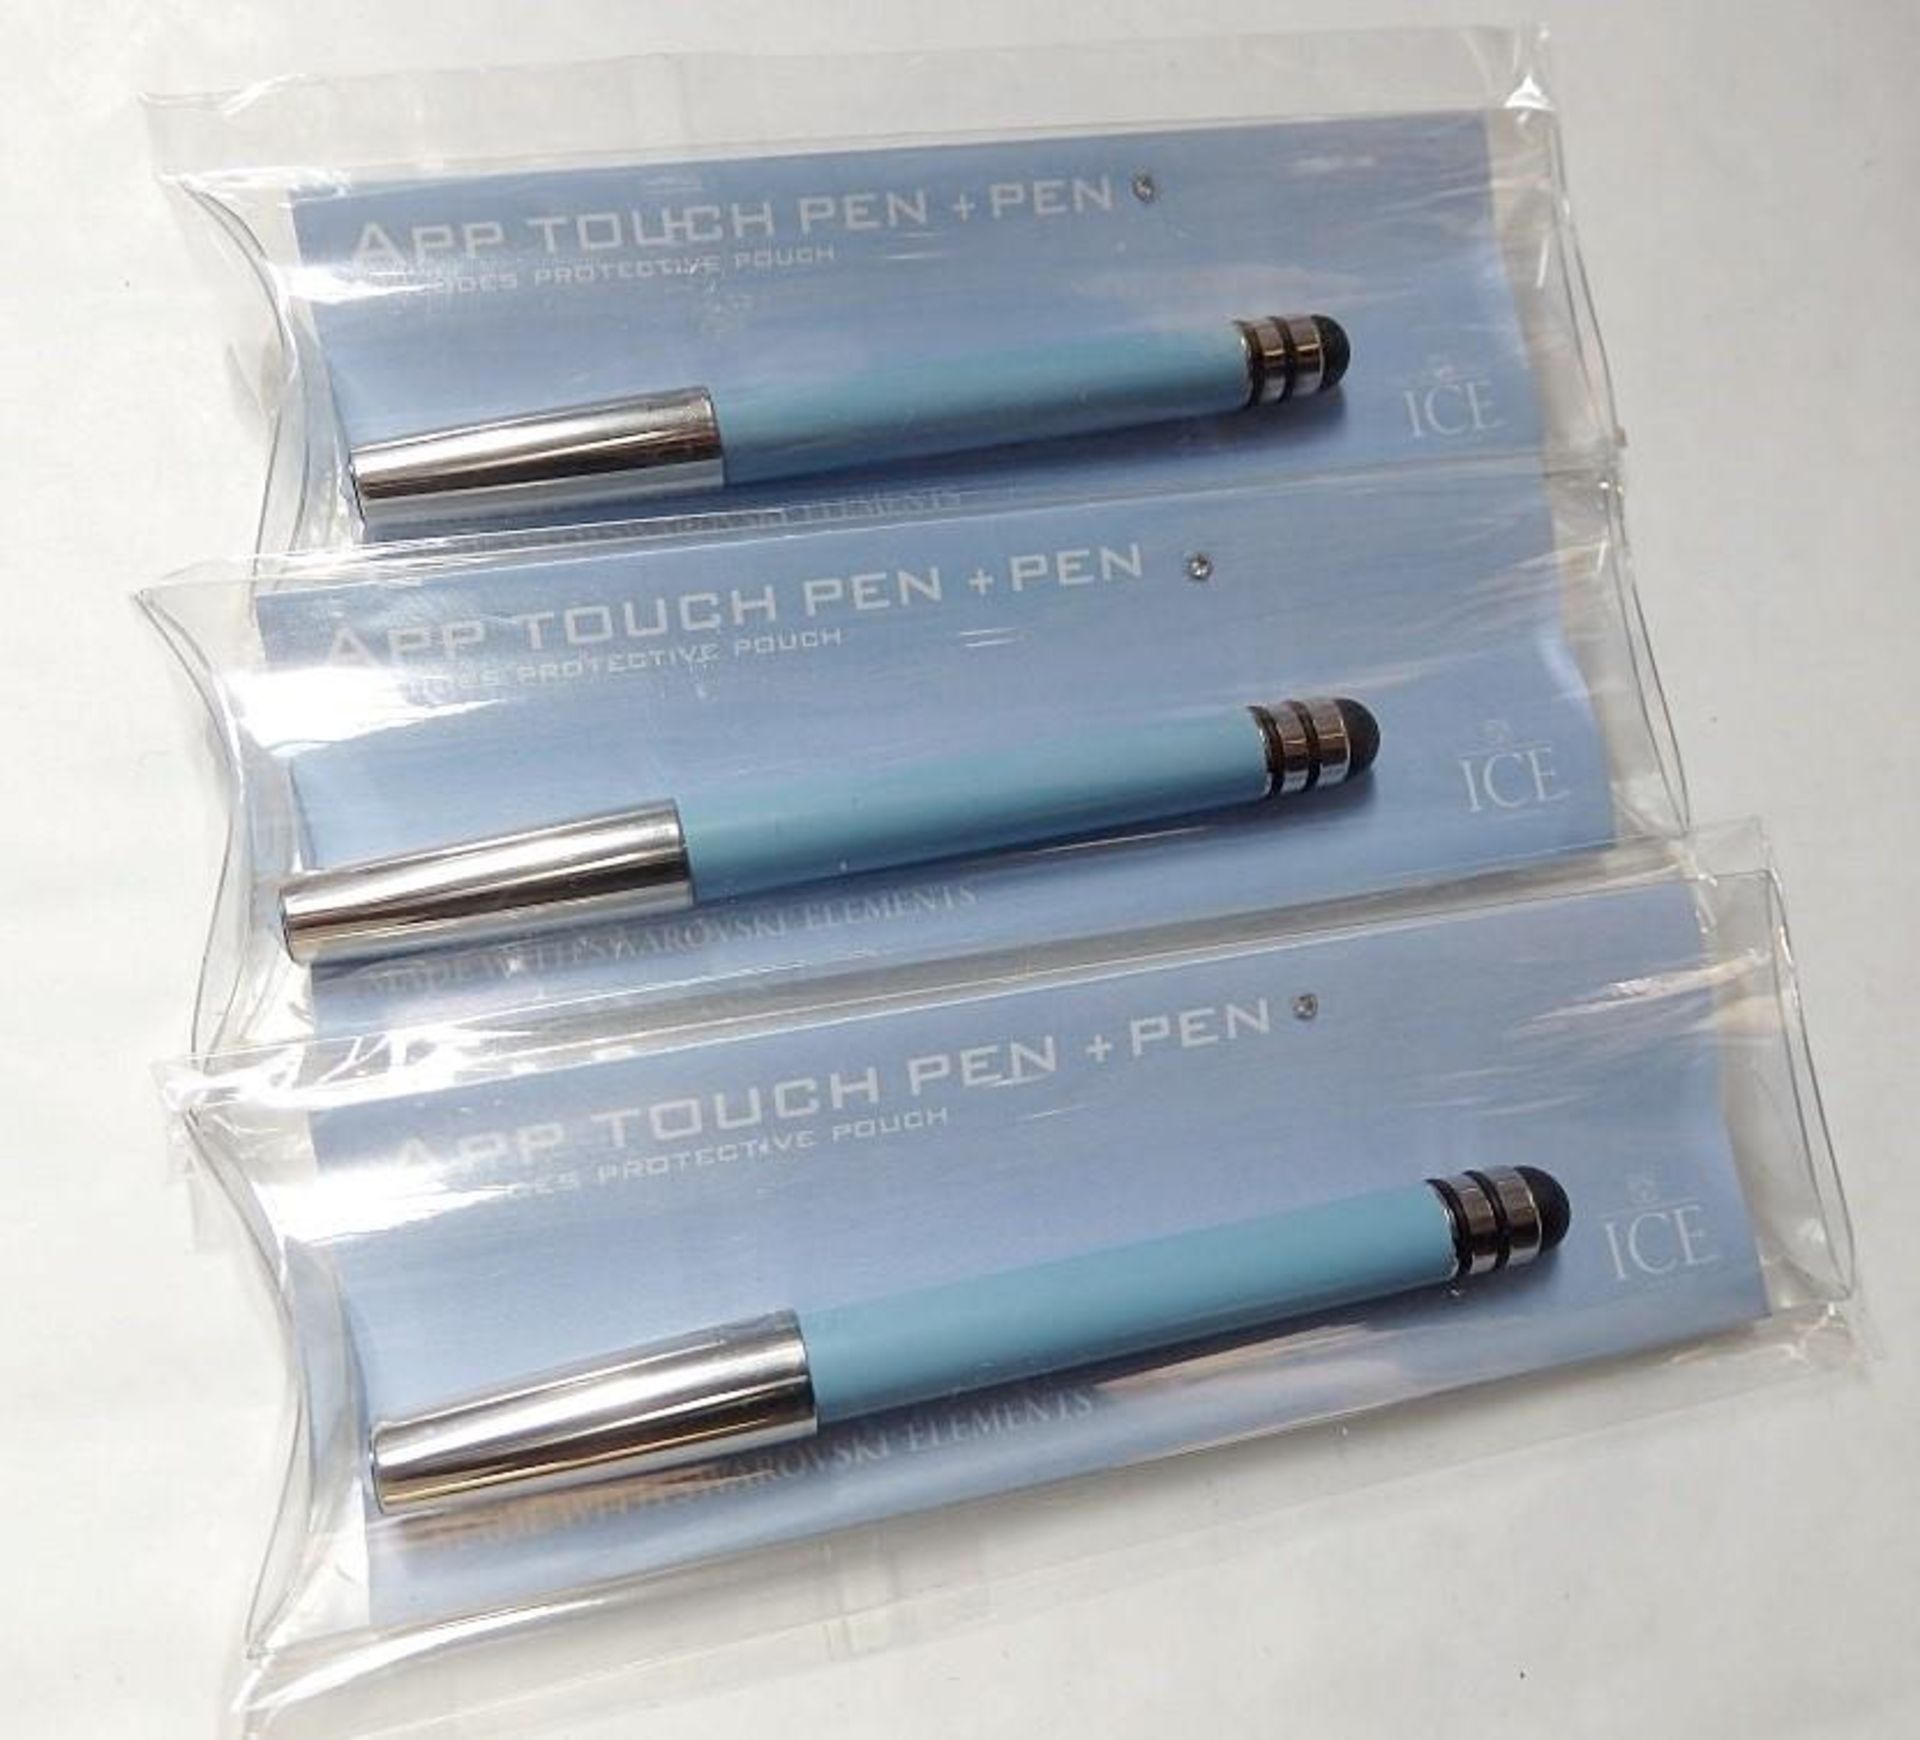 50 x ICE LONDON App Pen Duo - Touch Stylus And Ink Pen Combined - Colour: LIGHT BLUE - MADE WITH - Image 2 of 3